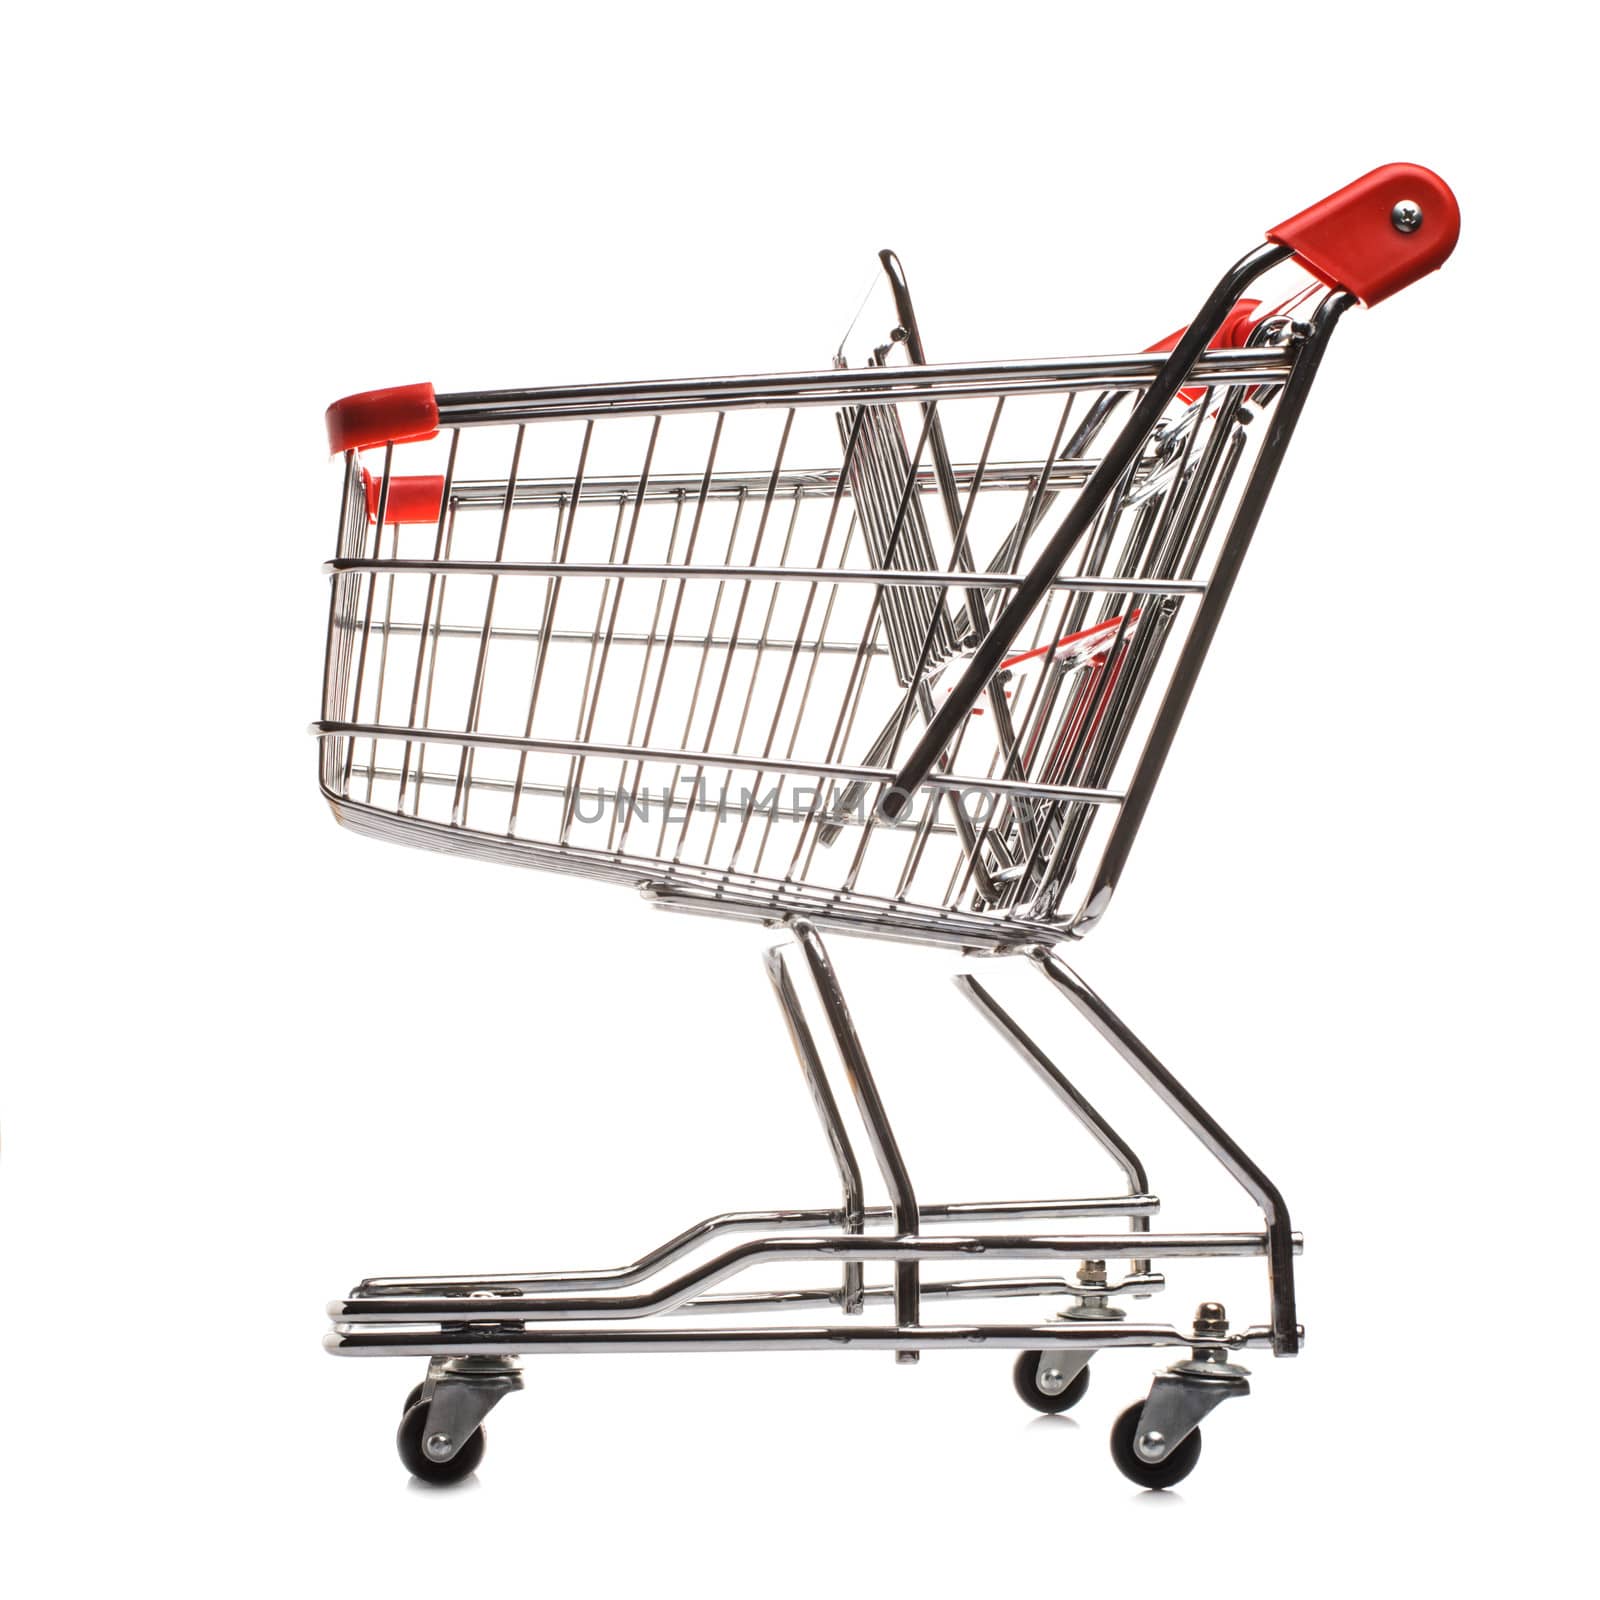 Red matal shopping trolley isolated on white background